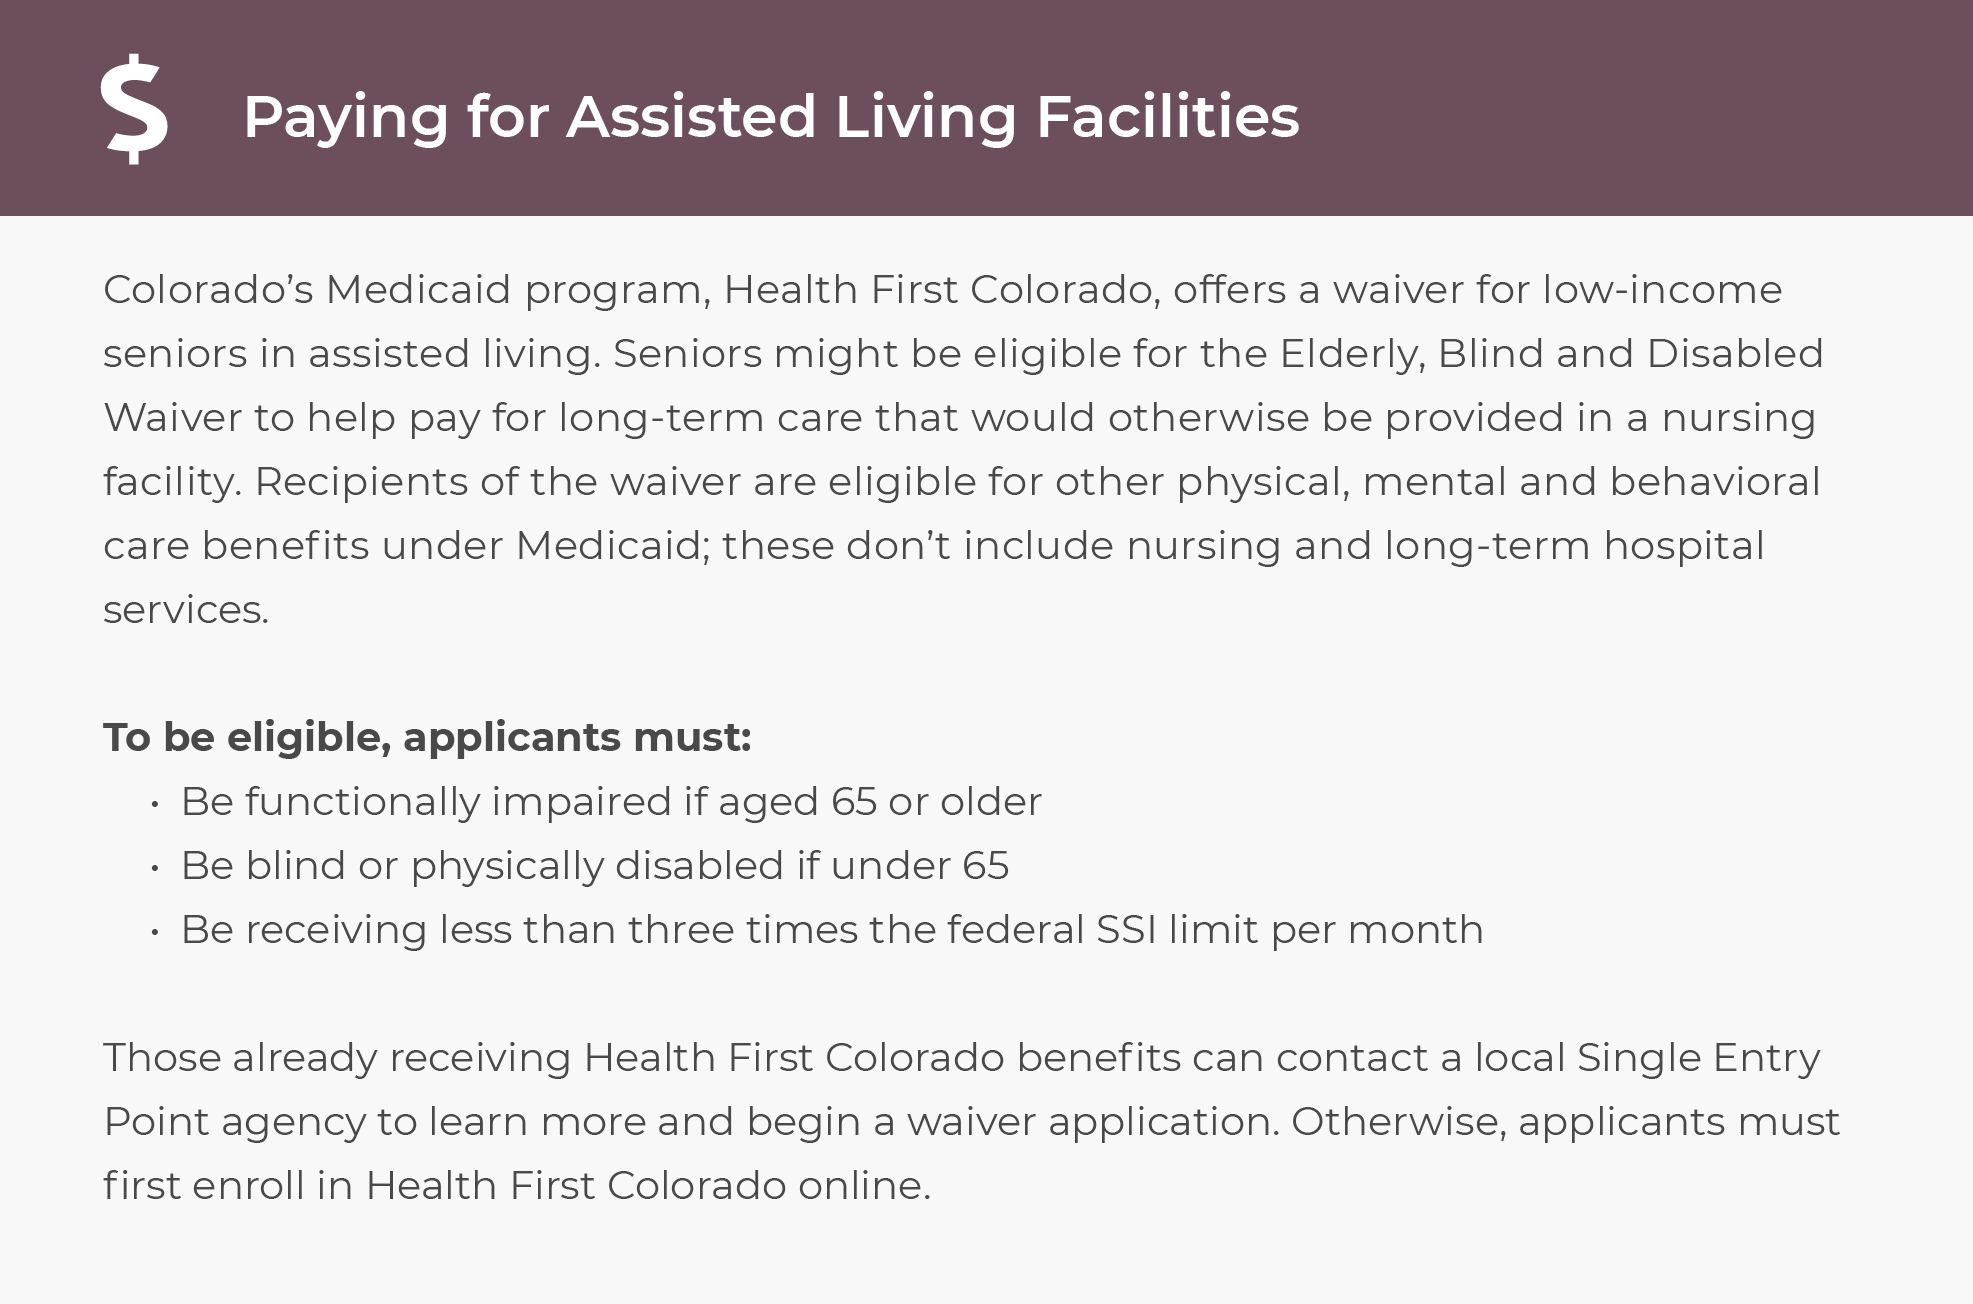 Paying for asissted living facilities in Colorado